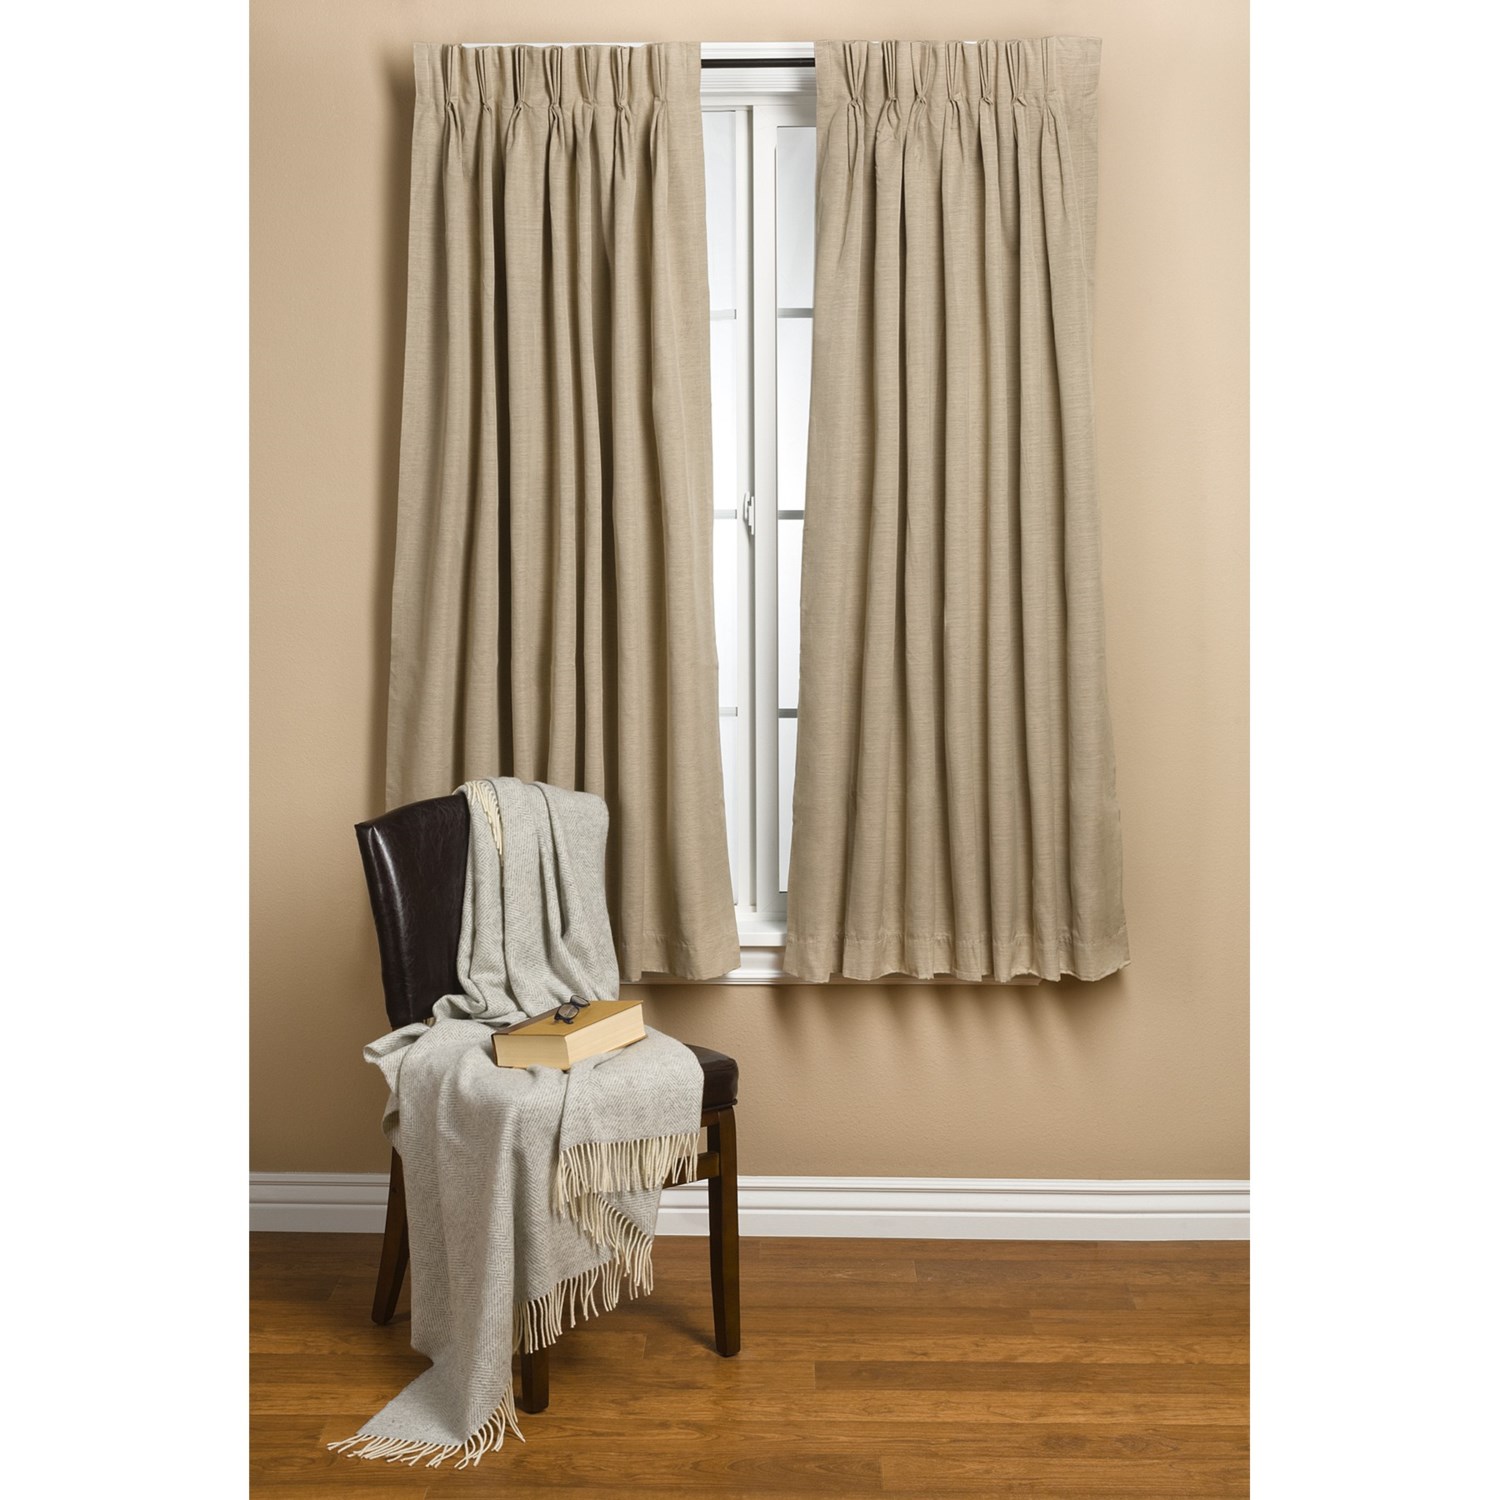 Commonwealth Home Fashions Hotel Chic Blackout Curtains - 120x84